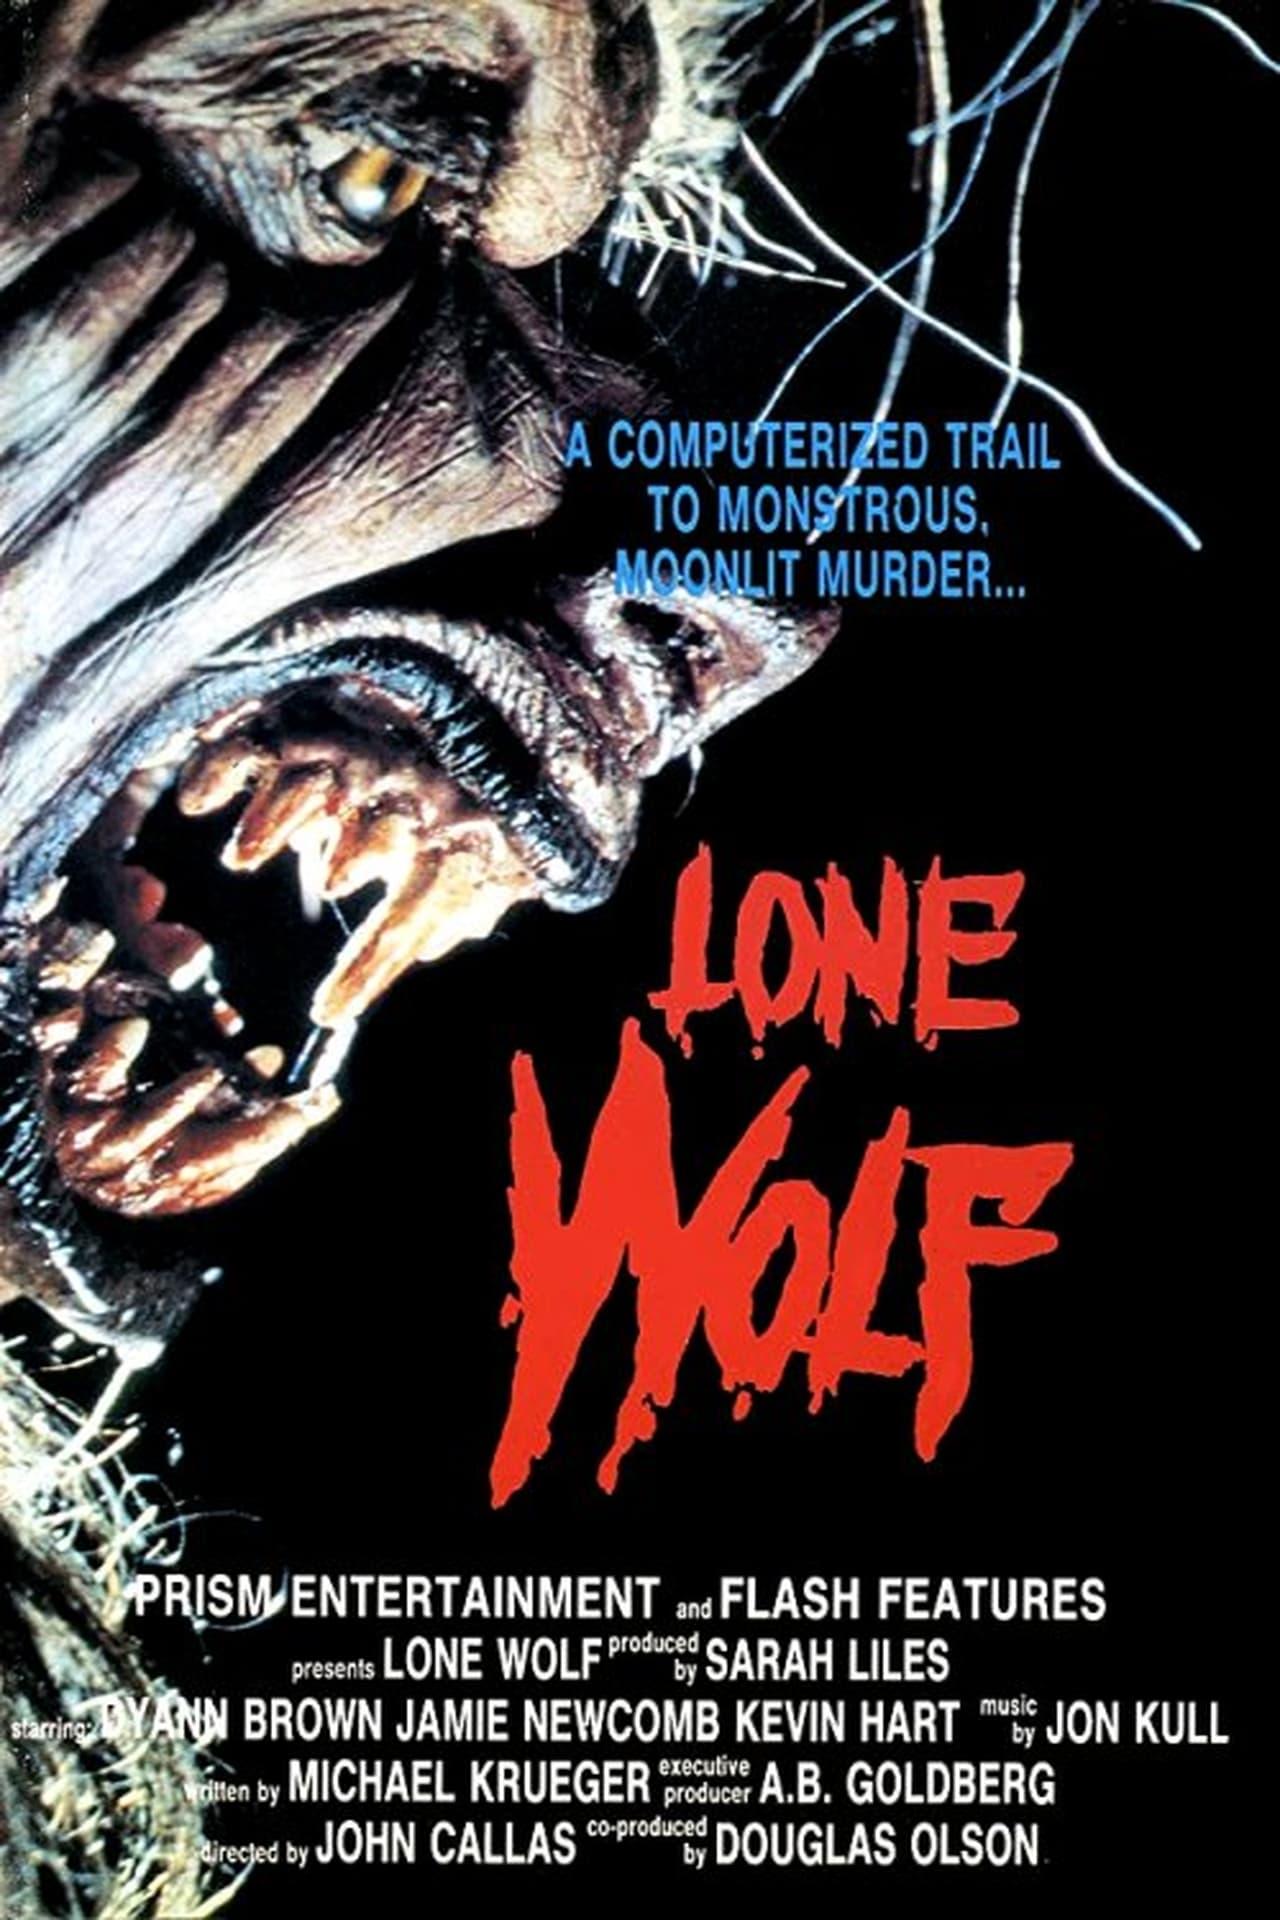 Lone Wolf poster